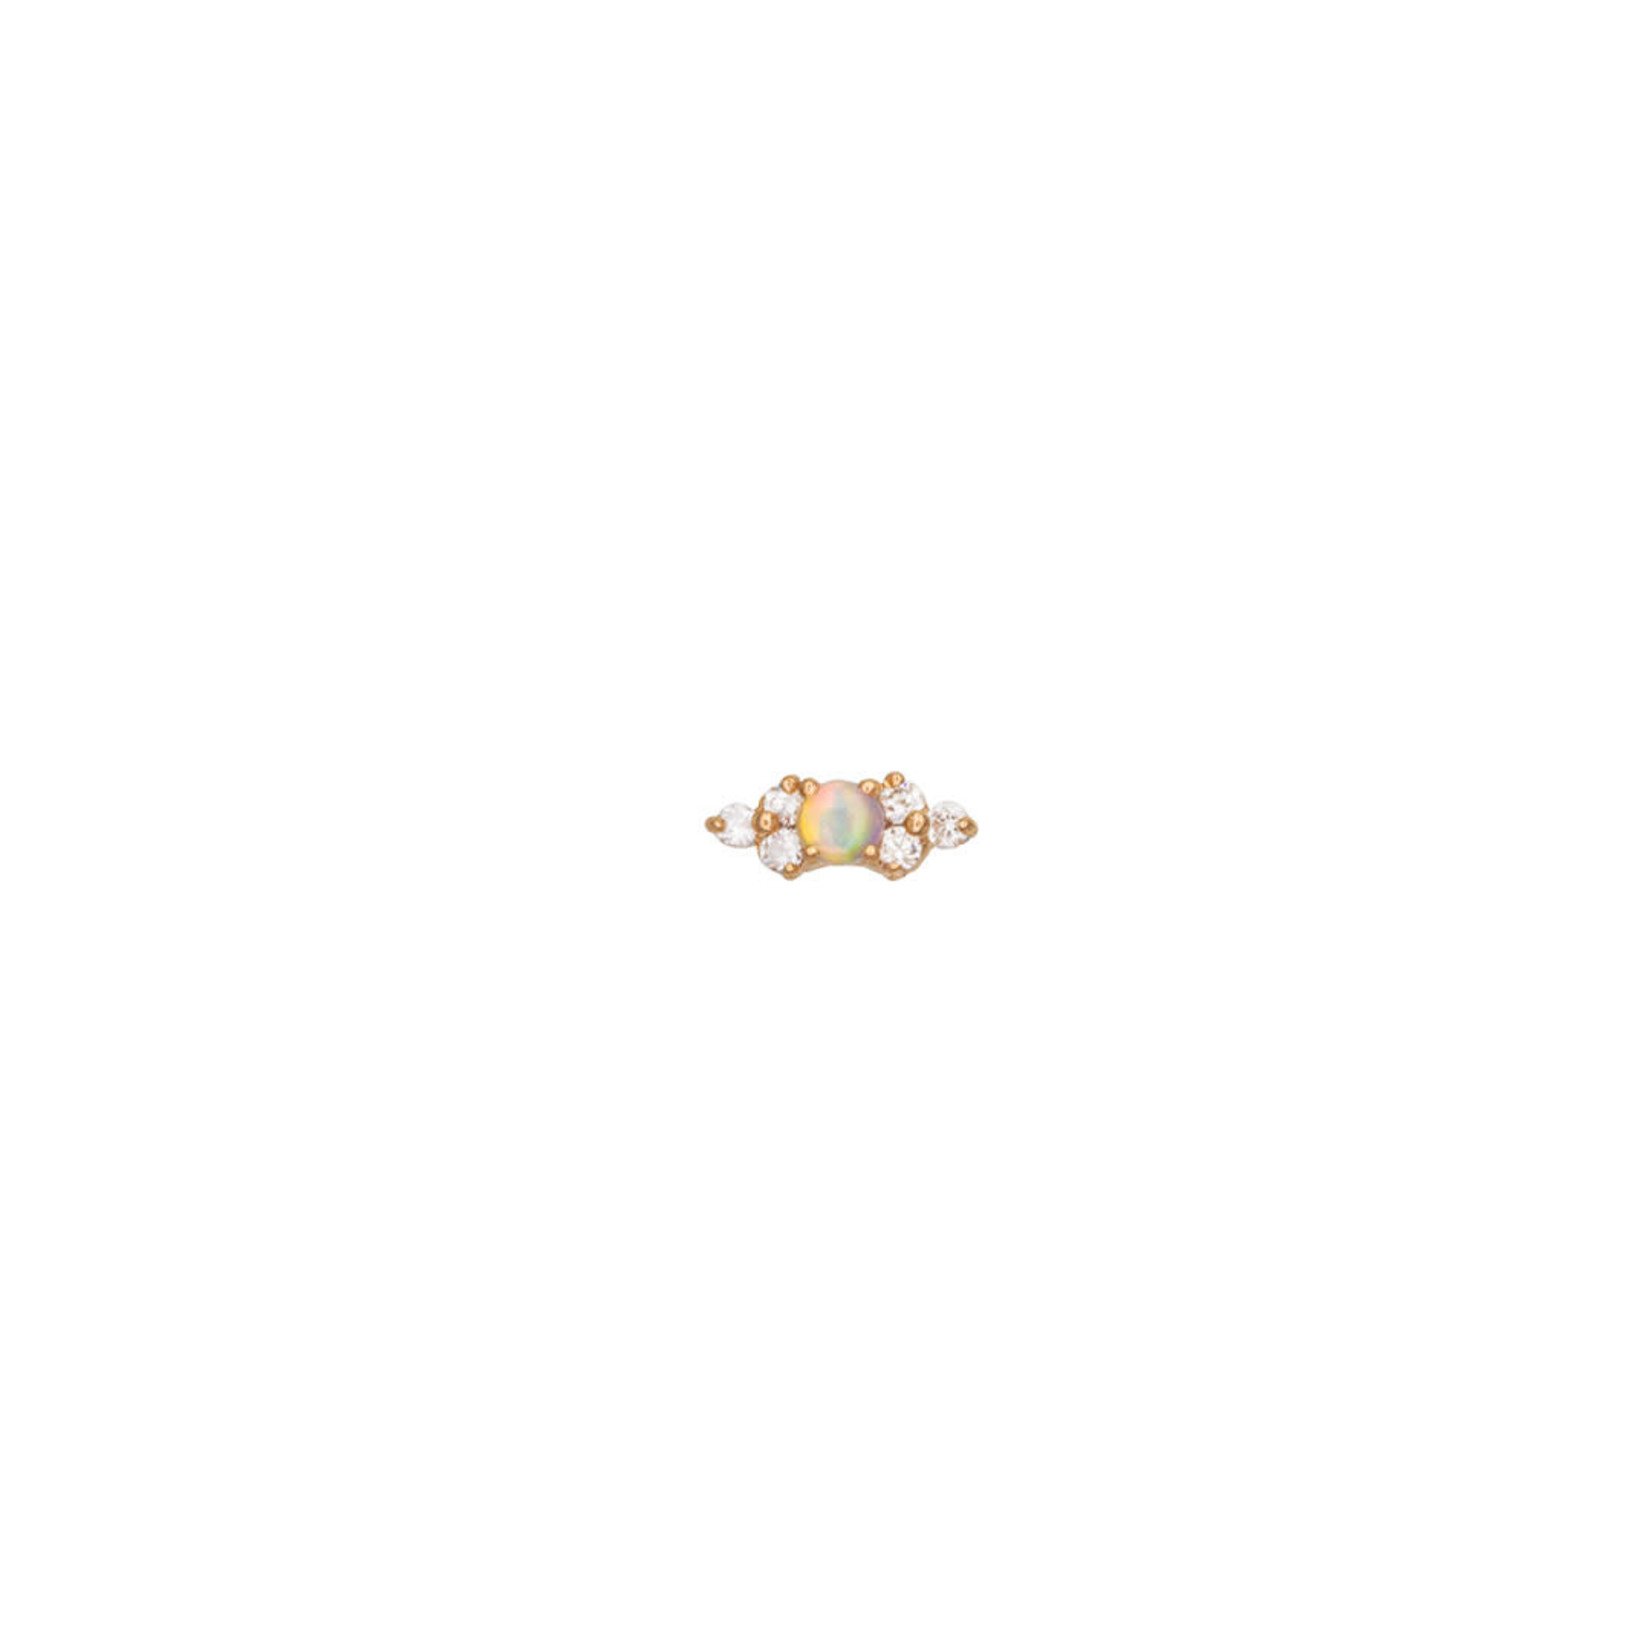 BVLA BVLA "Embrace" threaded end with 6x 1.0 VS1 diamond and 2.0 AAA white opal